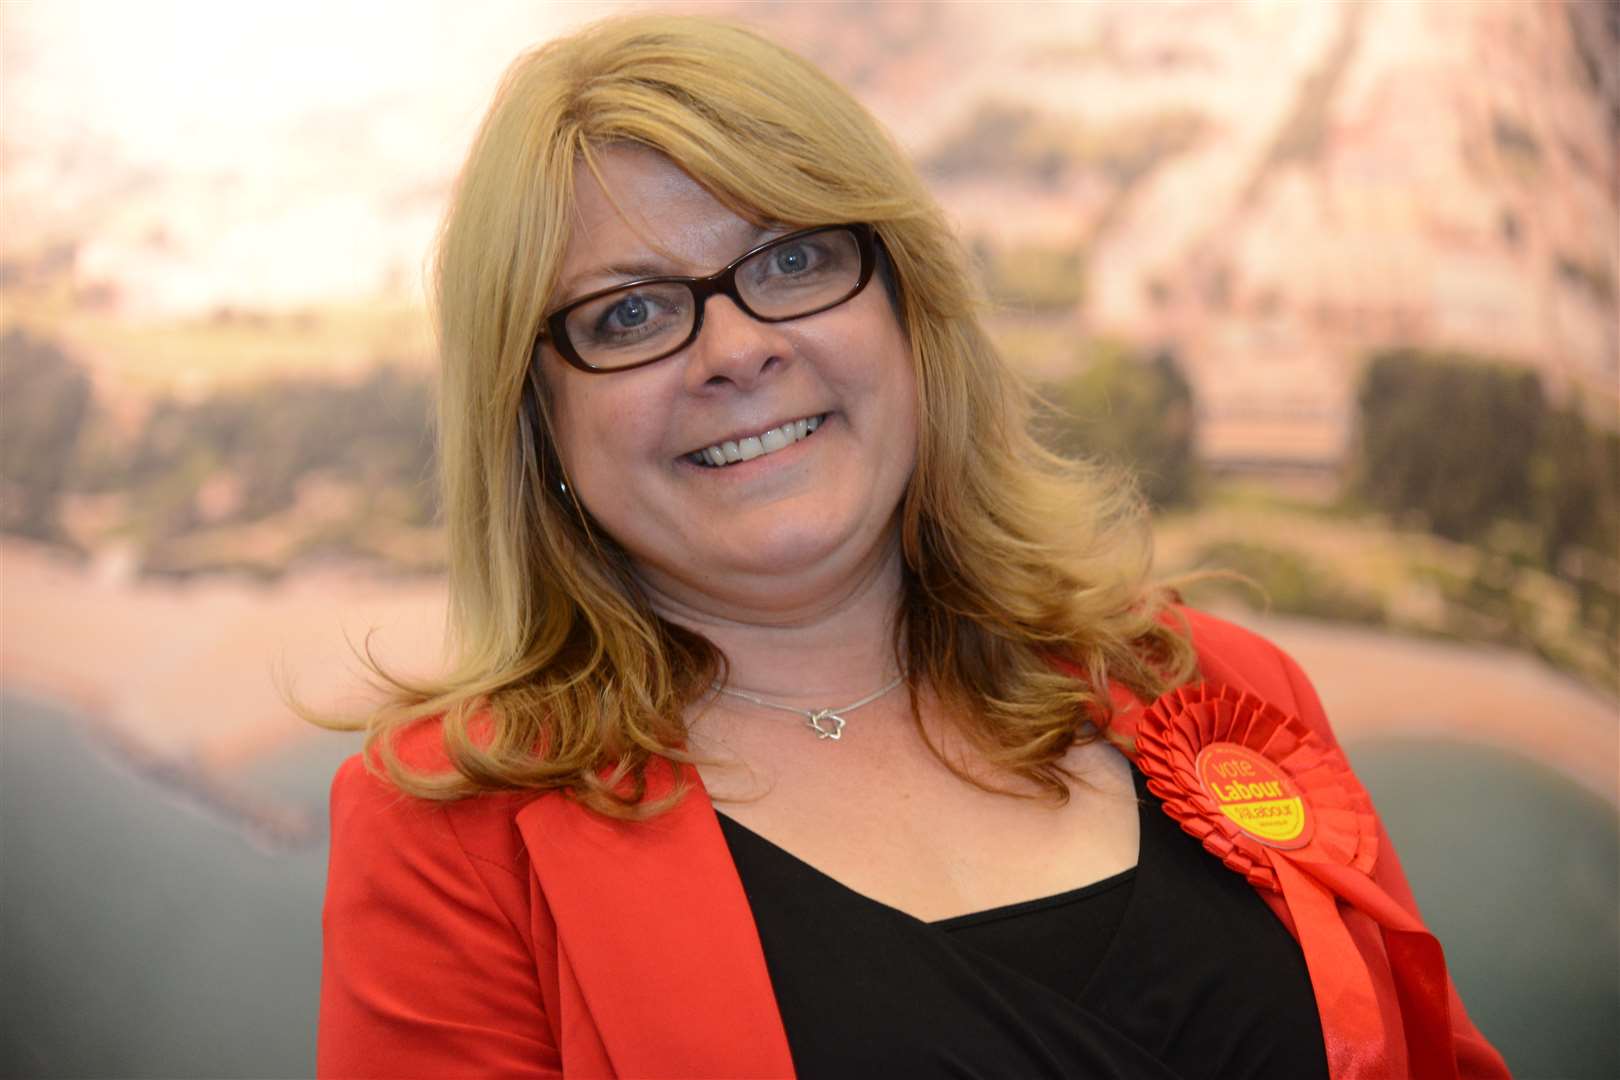 Cllr Claire Jeffrey has quit as a Labour councillor citing she could not stand in a party which "tolerates anti-Semitism"